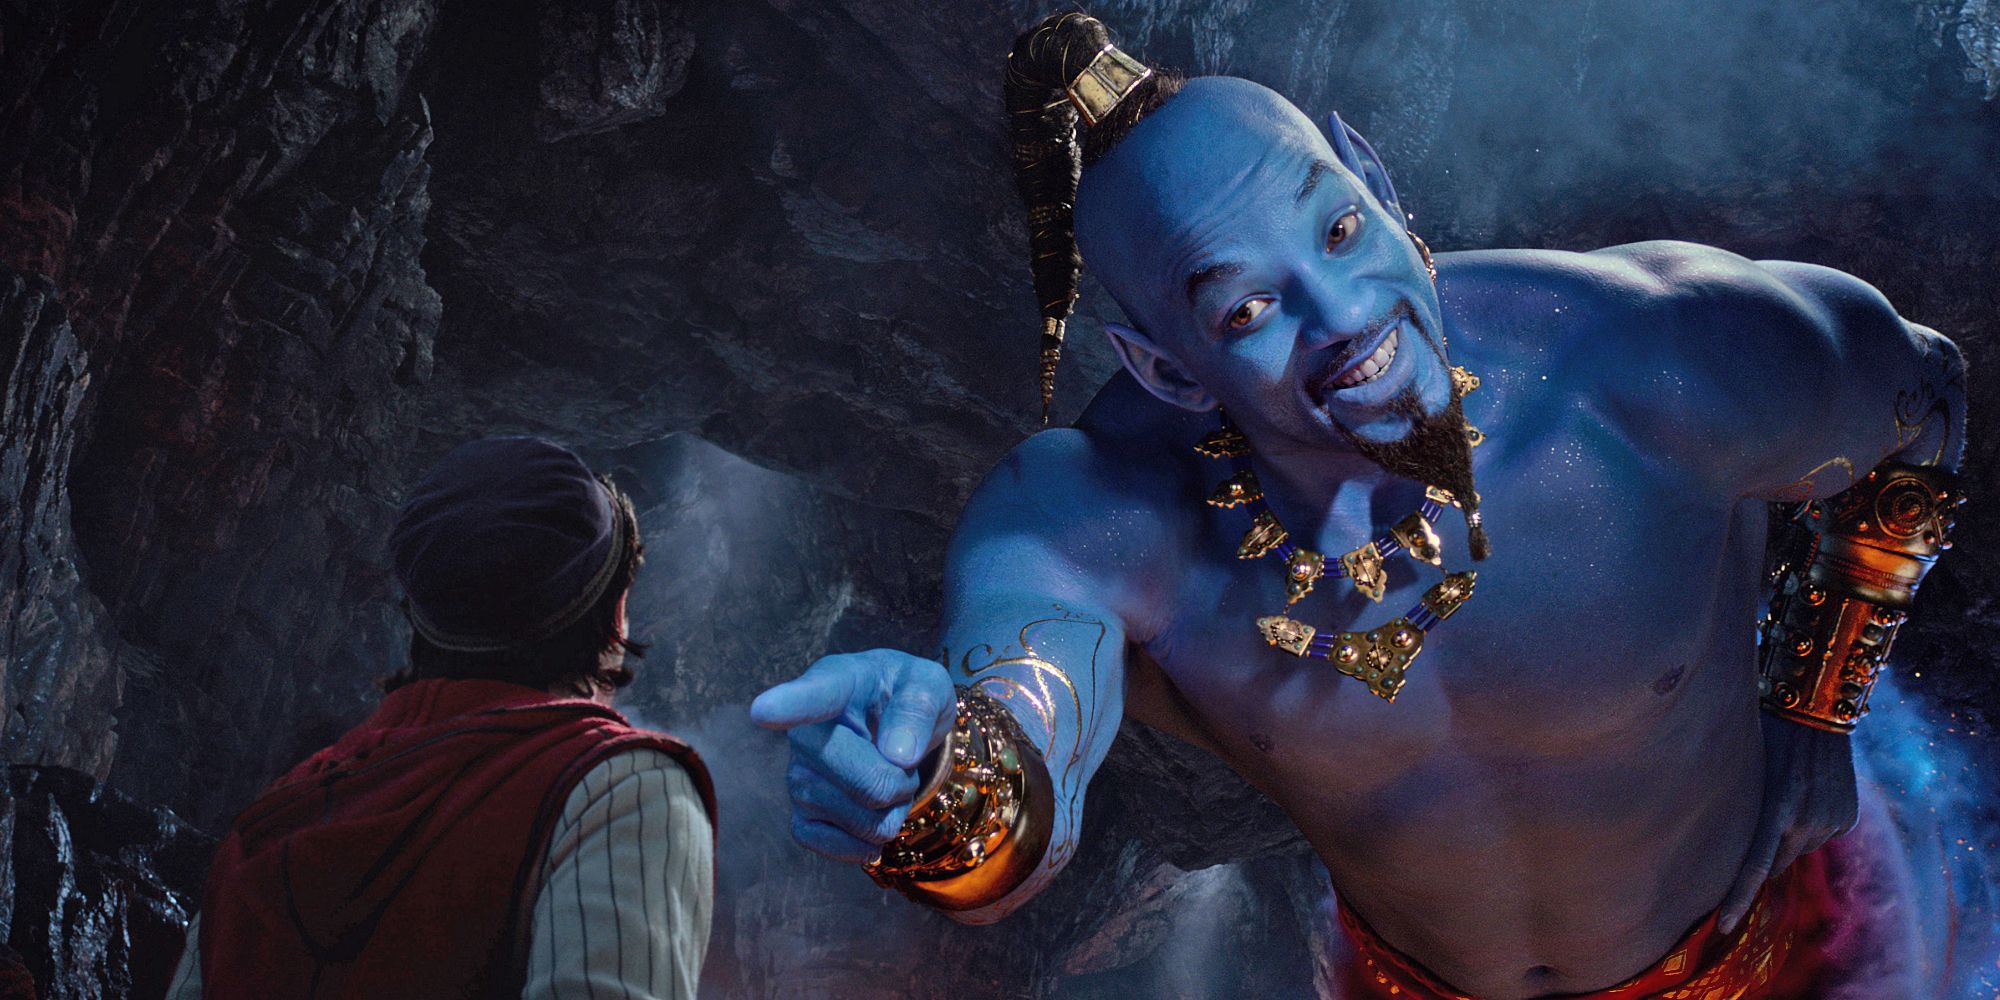 Aladdin 5 Things They Changed In The New 2019 Movie (& 5 Things They Kept The Same)